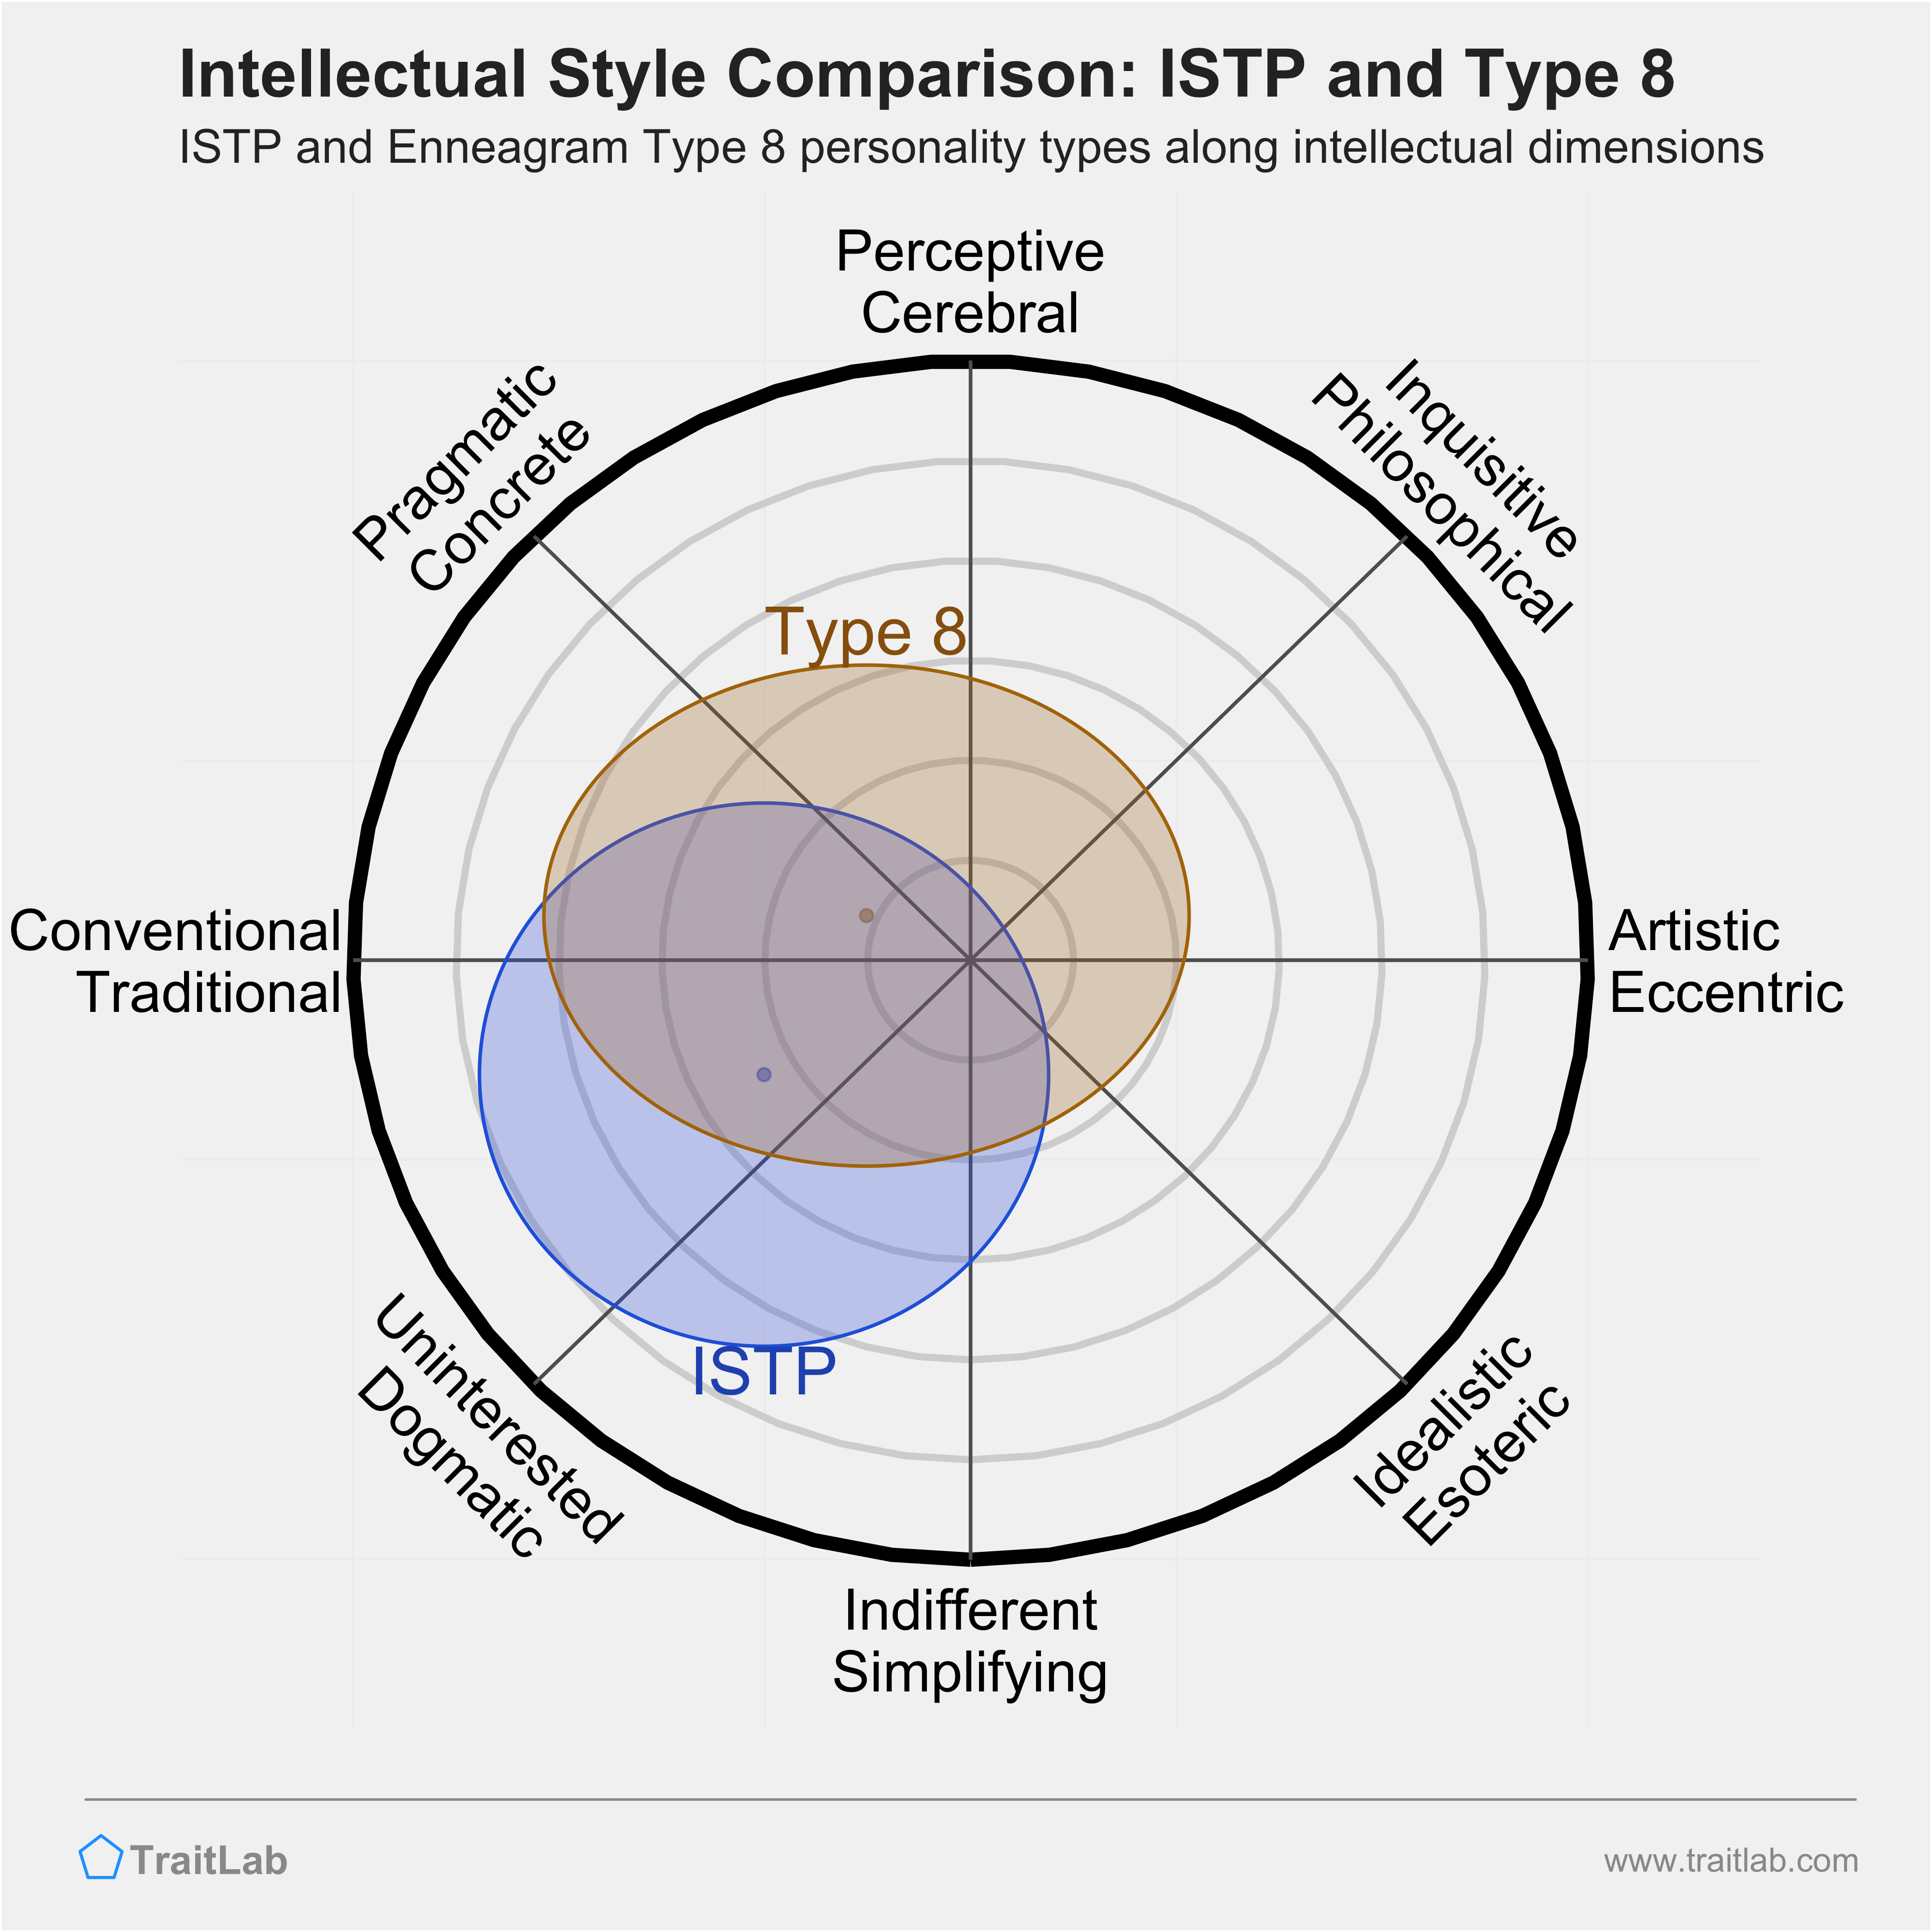 ISTP and Type 8 comparison across intellectual dimensions